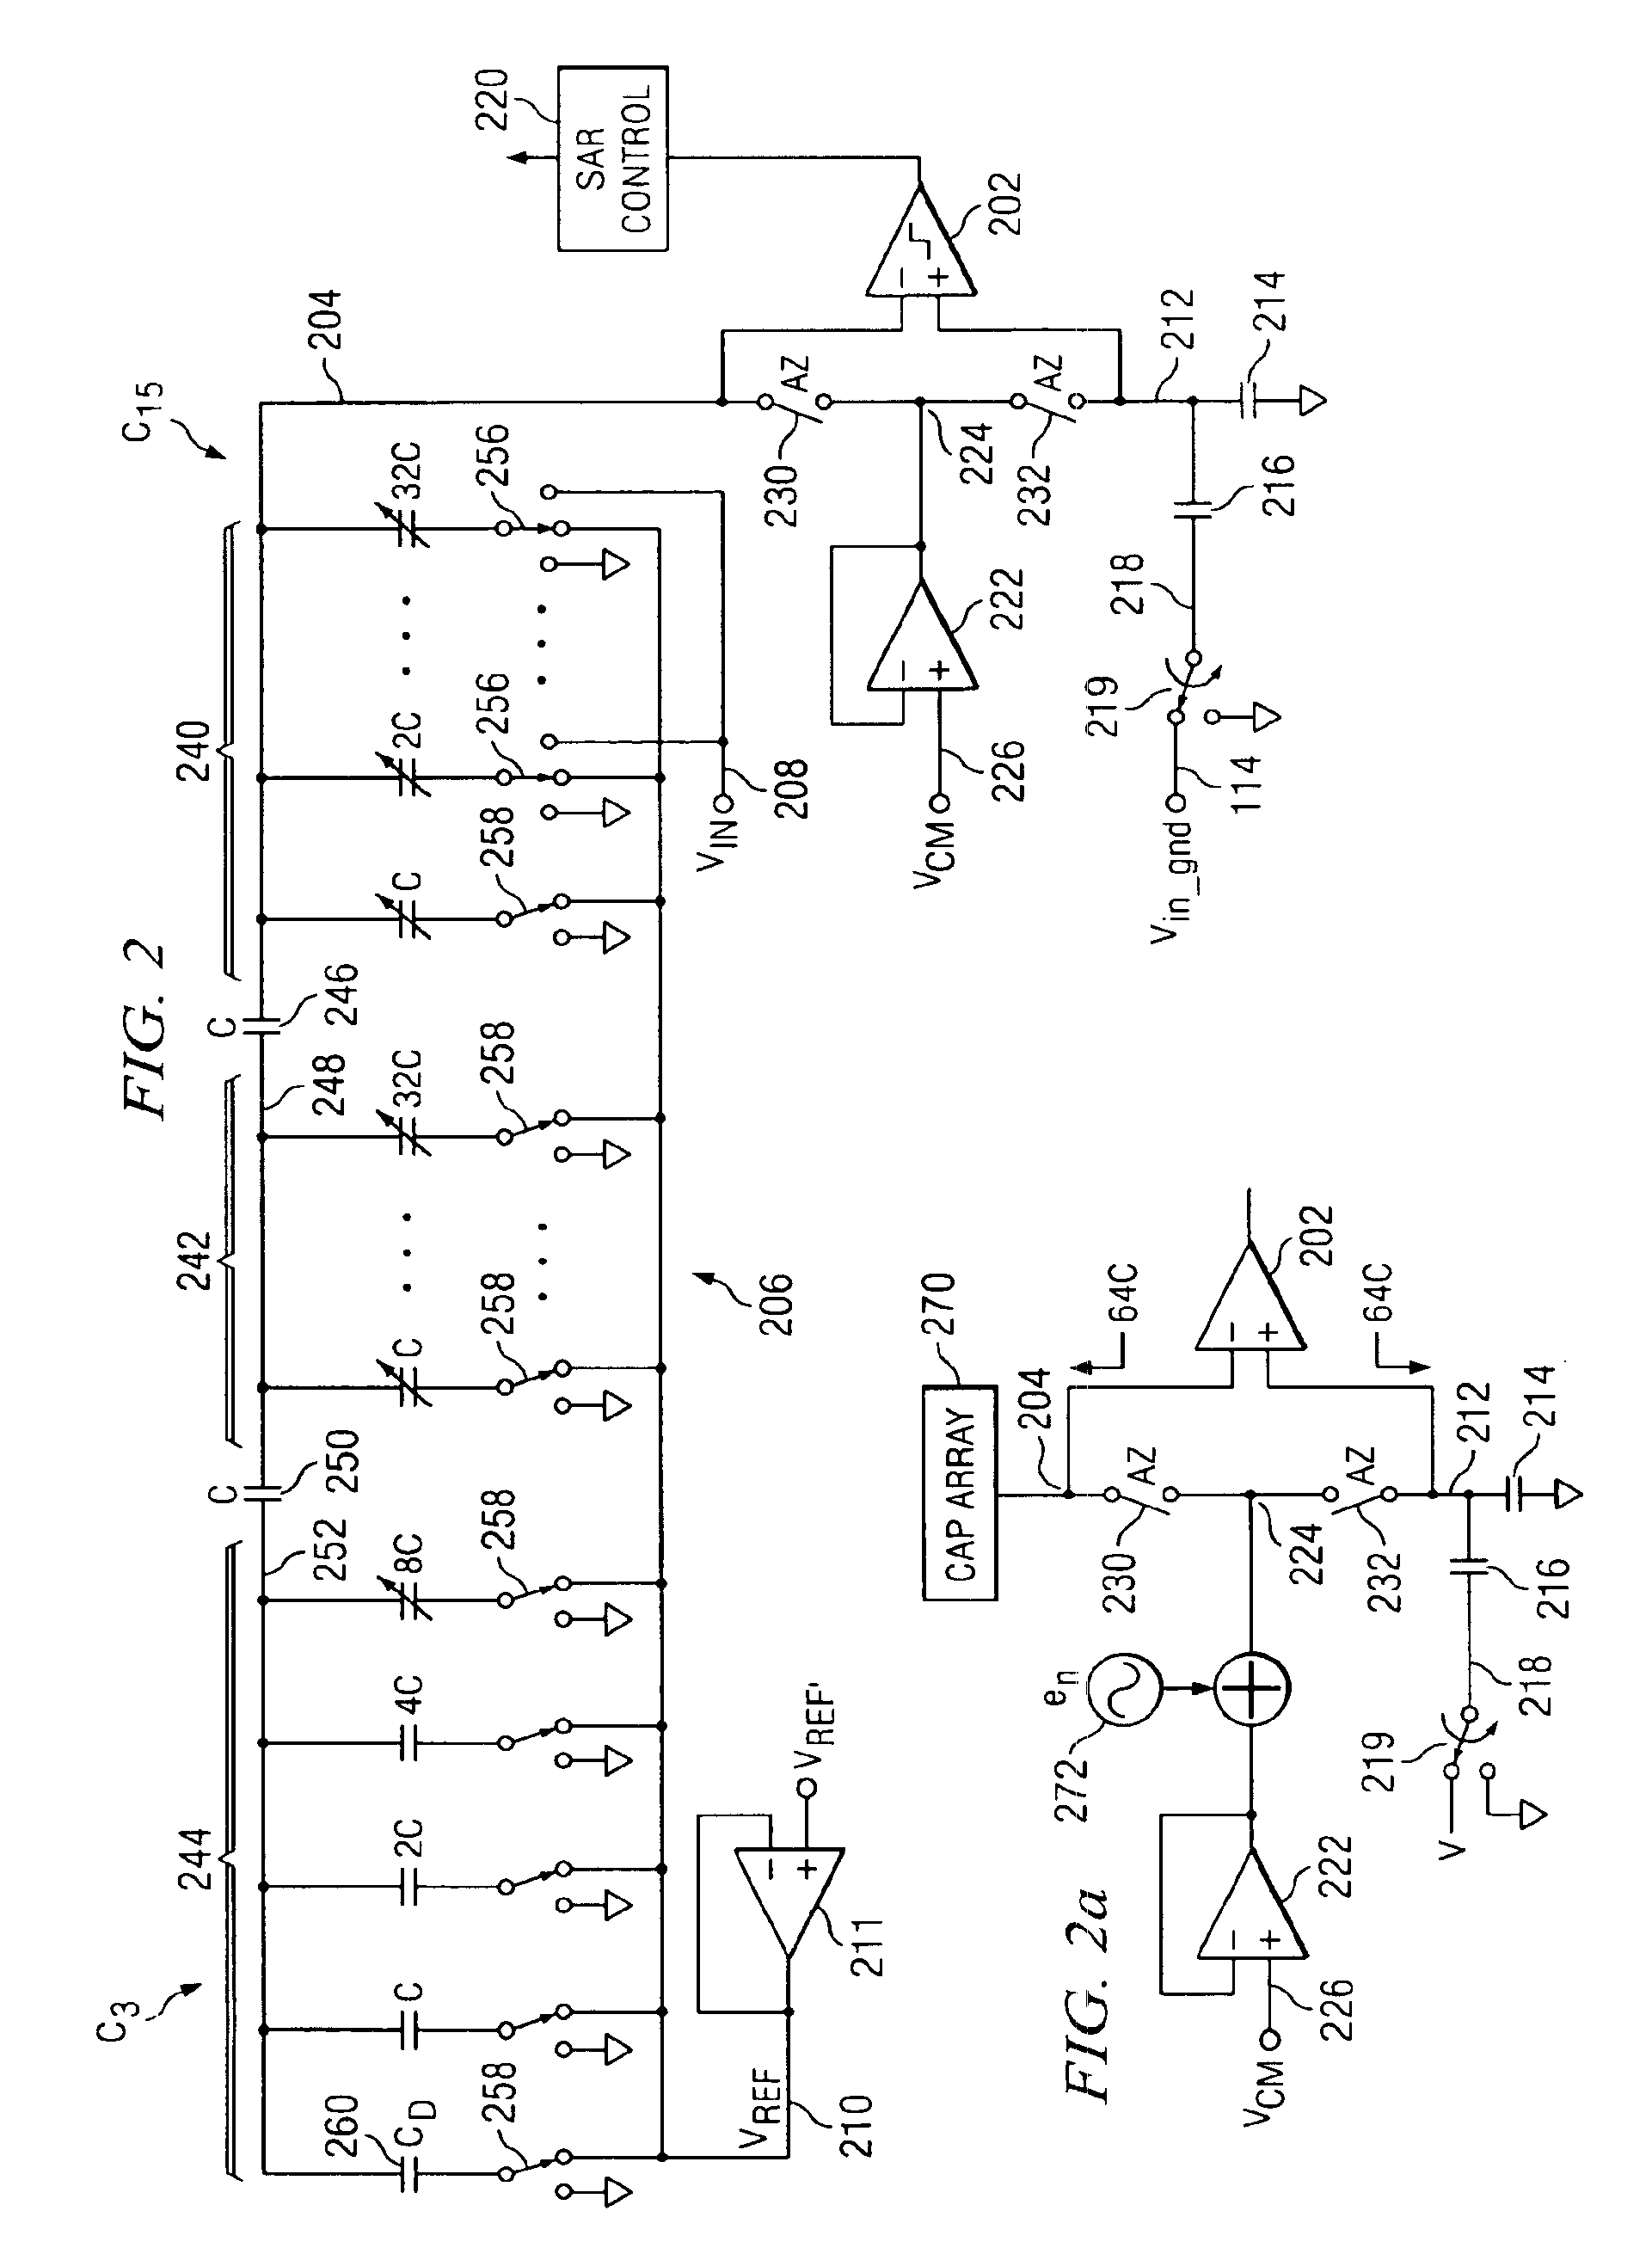 Open loop common mode driver for switched capacitor input to SAR